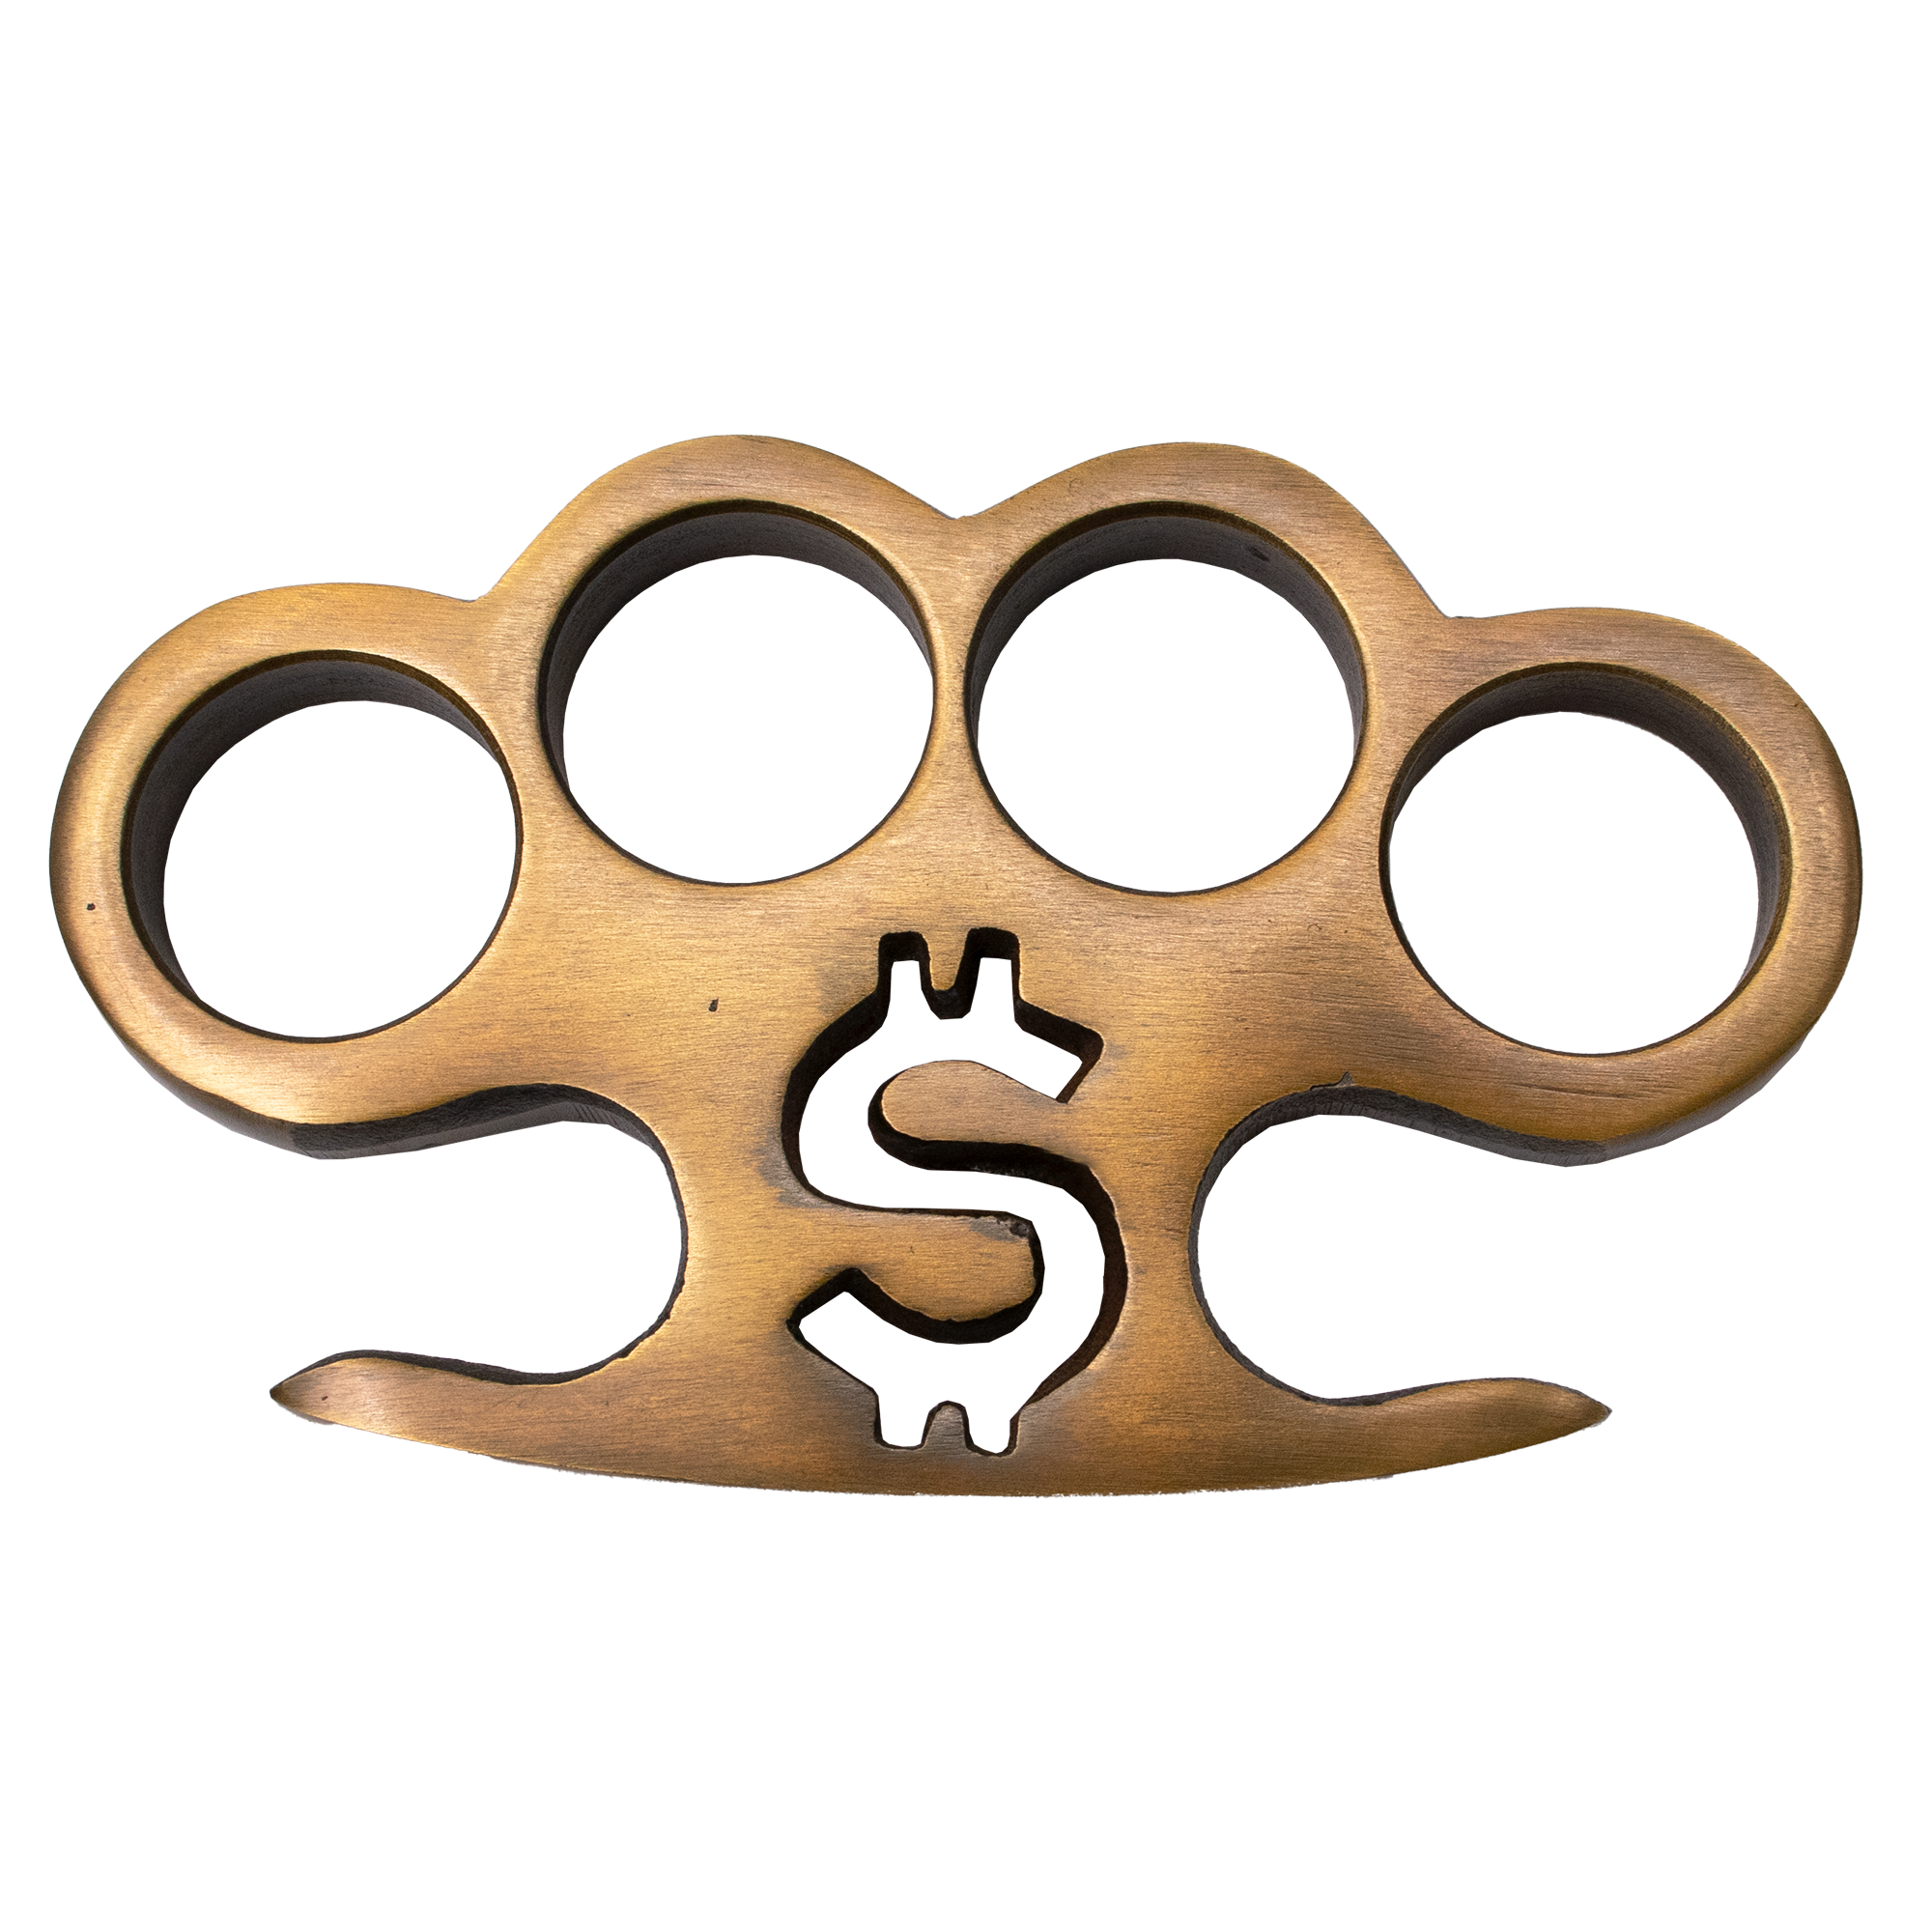 Solid Heavy Real Brass Knuckles – Panther Wholesale